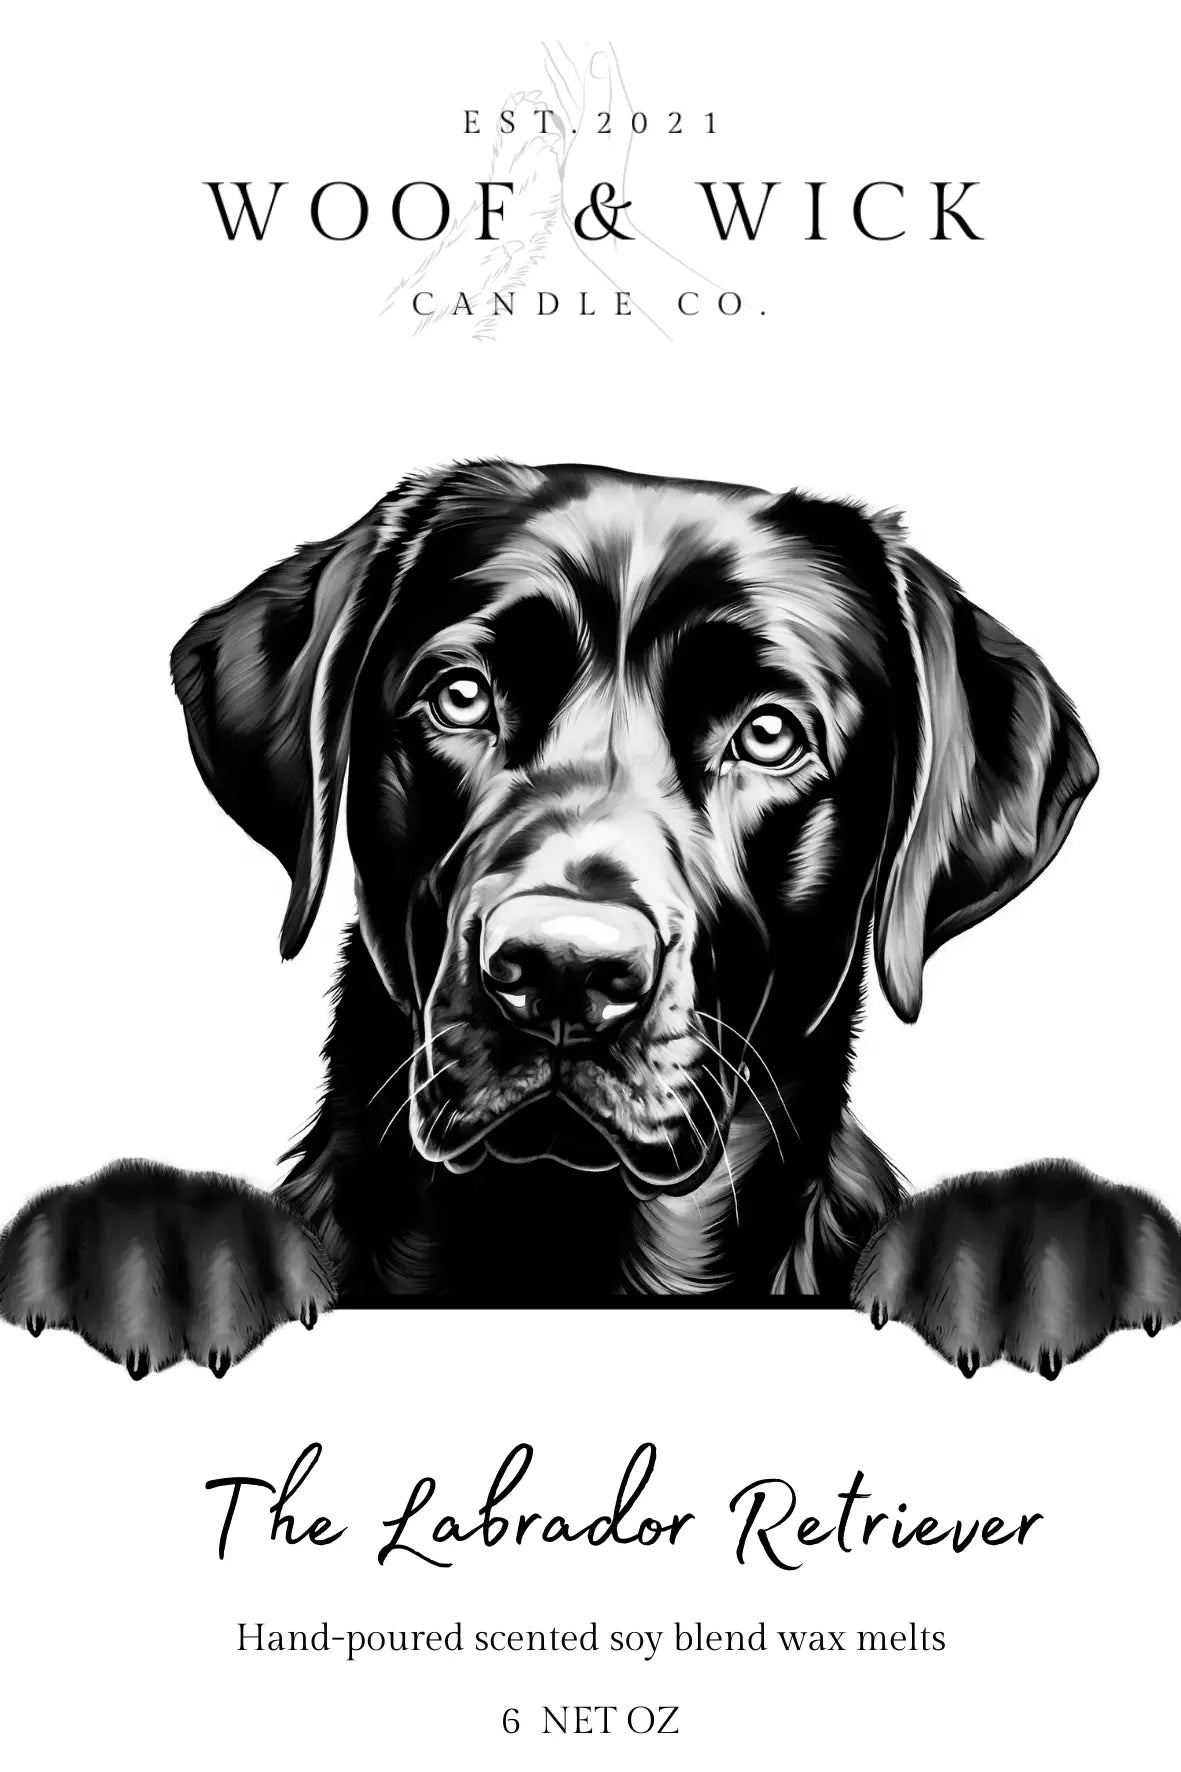 The Labrador Retriever - Personalized Scented Wax Melt Scoopies - Woof & Wick Candle Co.